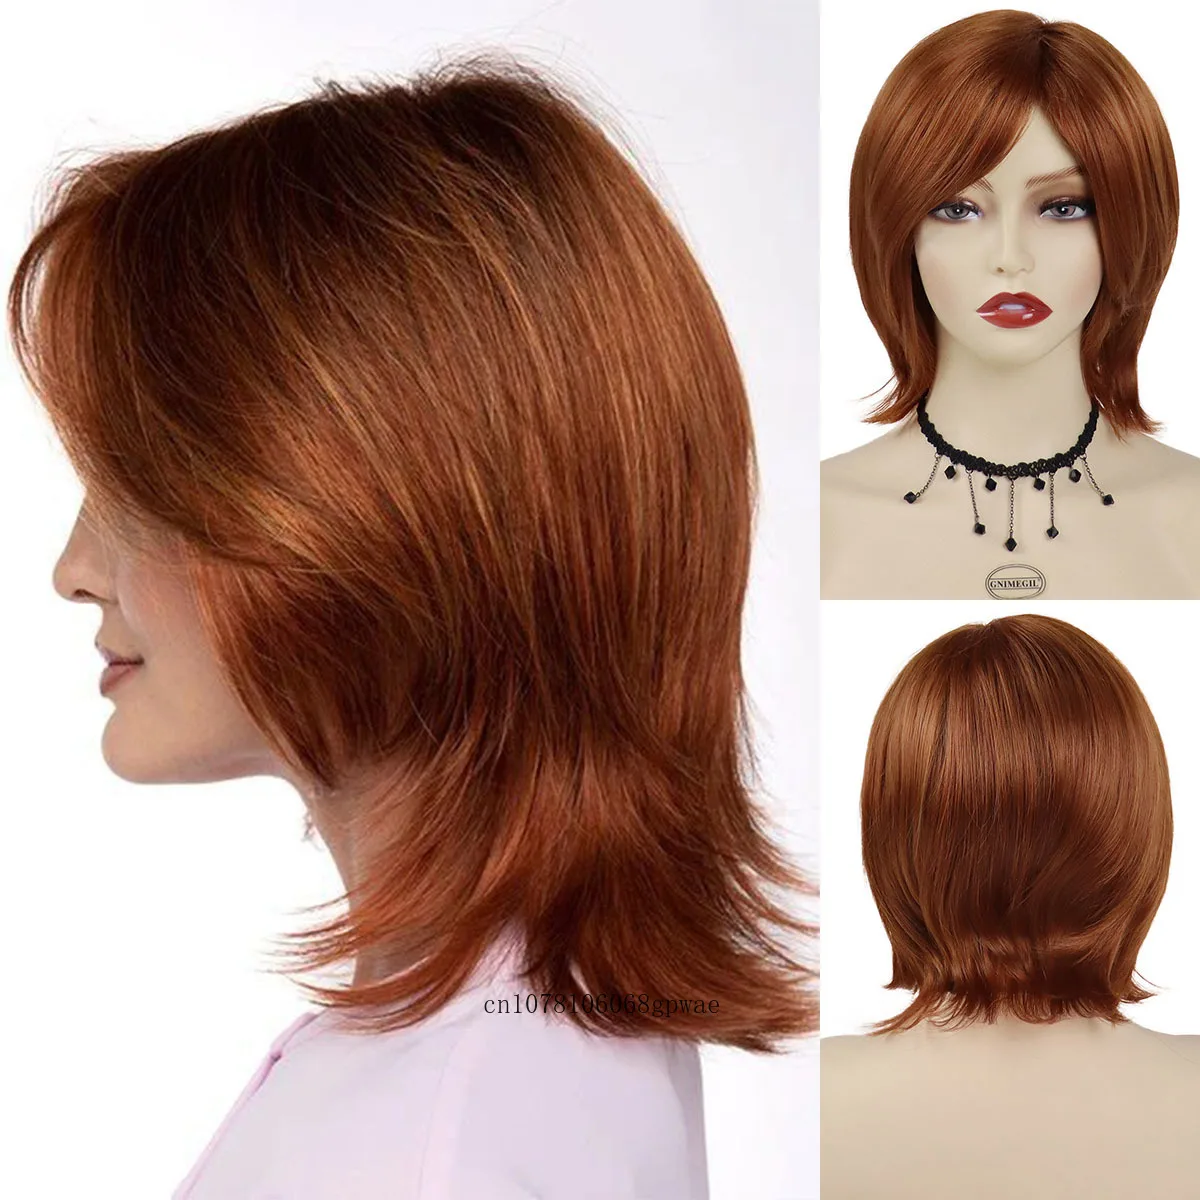 

Stylish Auburn Ladies Wig Synthetic Short Bob Wigs for Women Natural Soft Female Wig with Bangs Side Parting Hair Cosplay Party